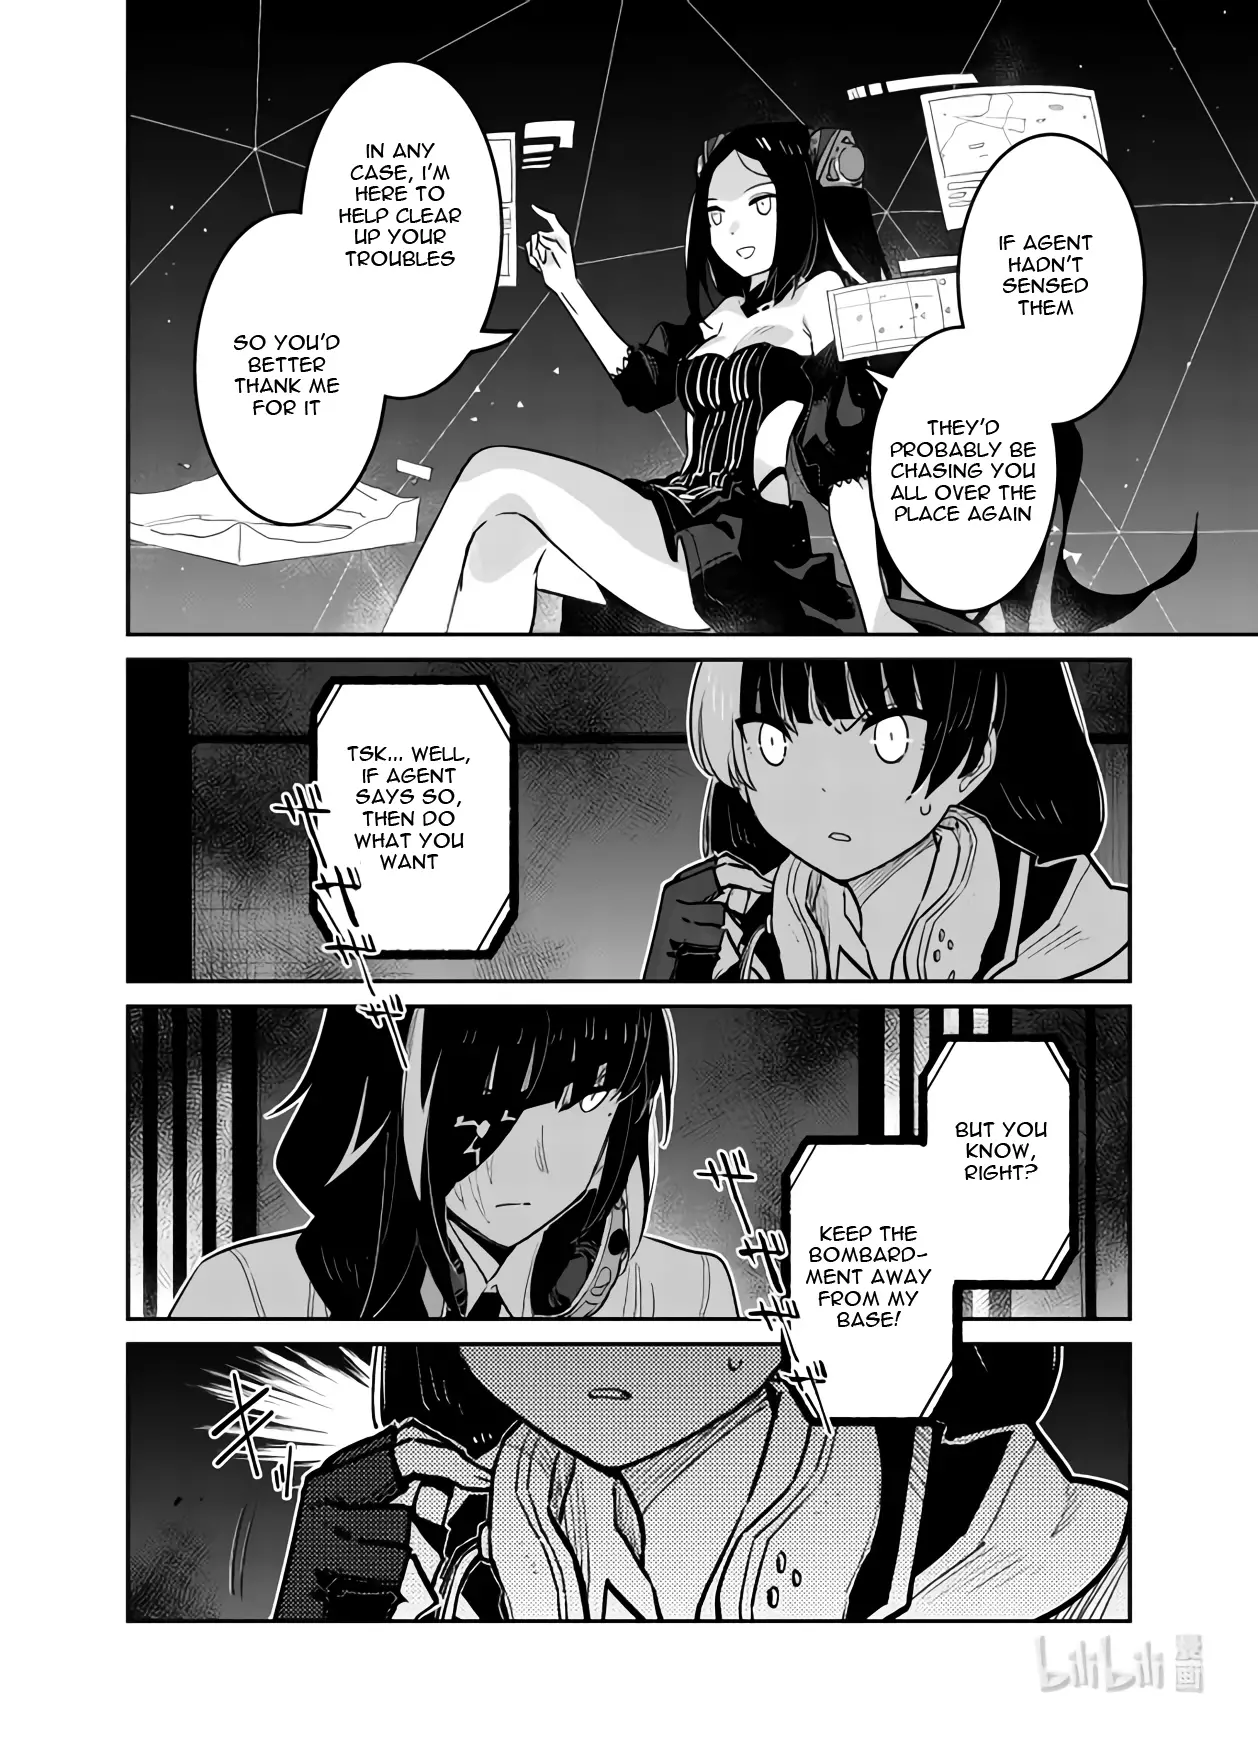 Girls' Frontline - 30 page 25-ac685436